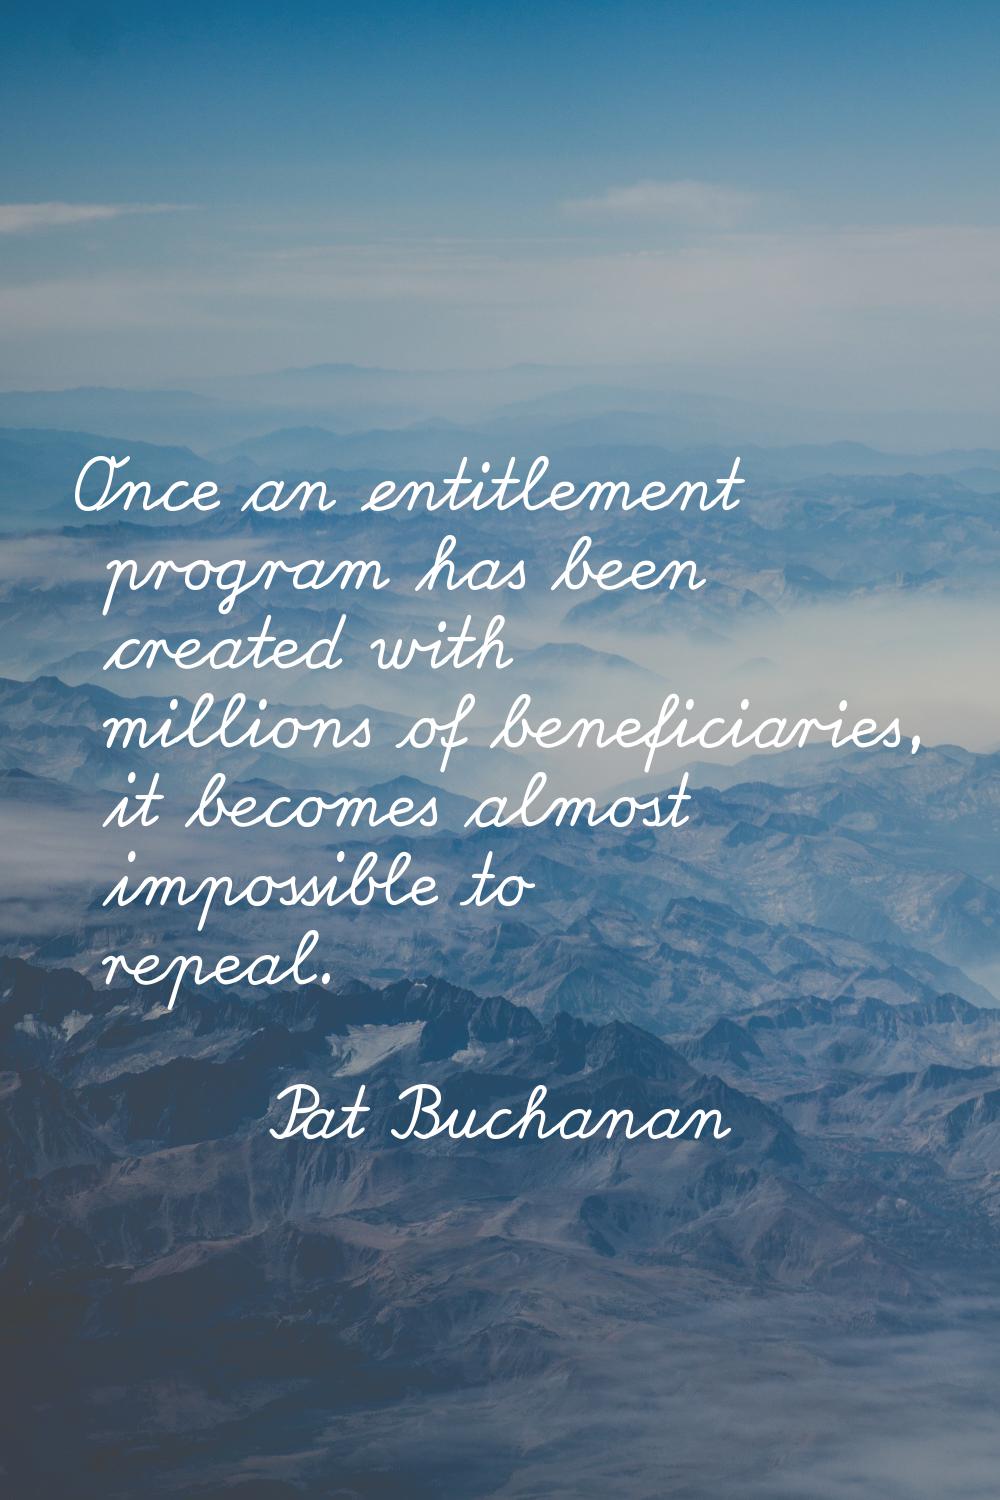 Once an entitlement program has been created with millions of beneficiaries, it becomes almost impo